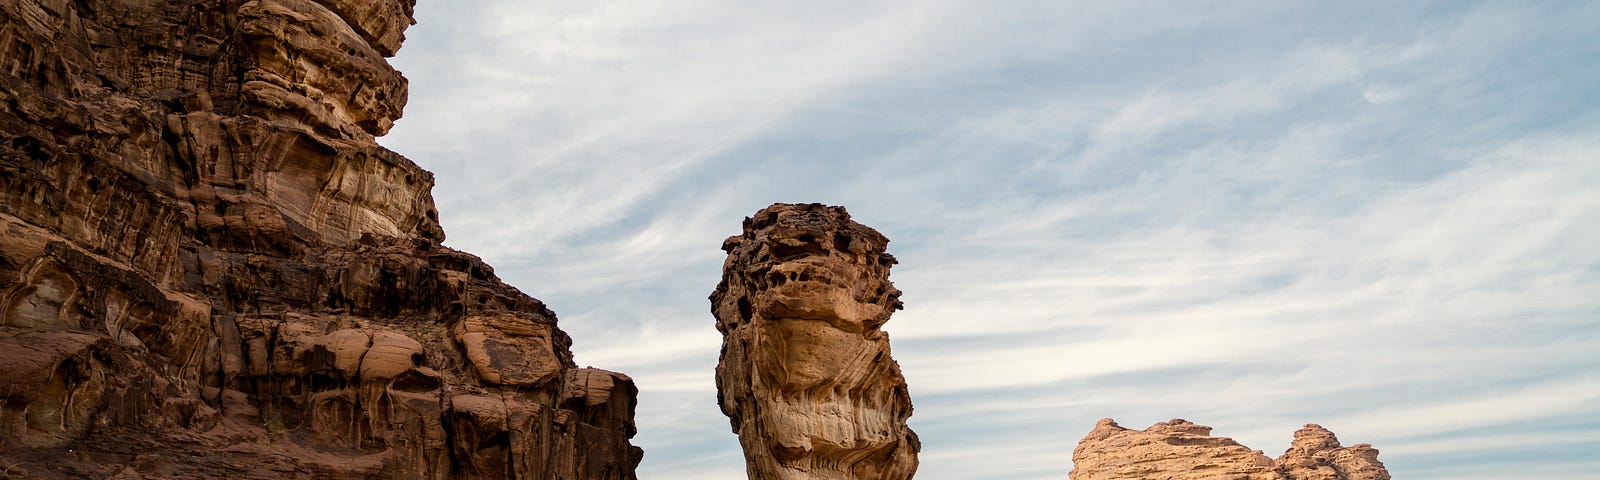 a person standing near a natural monolith in a desert landscape